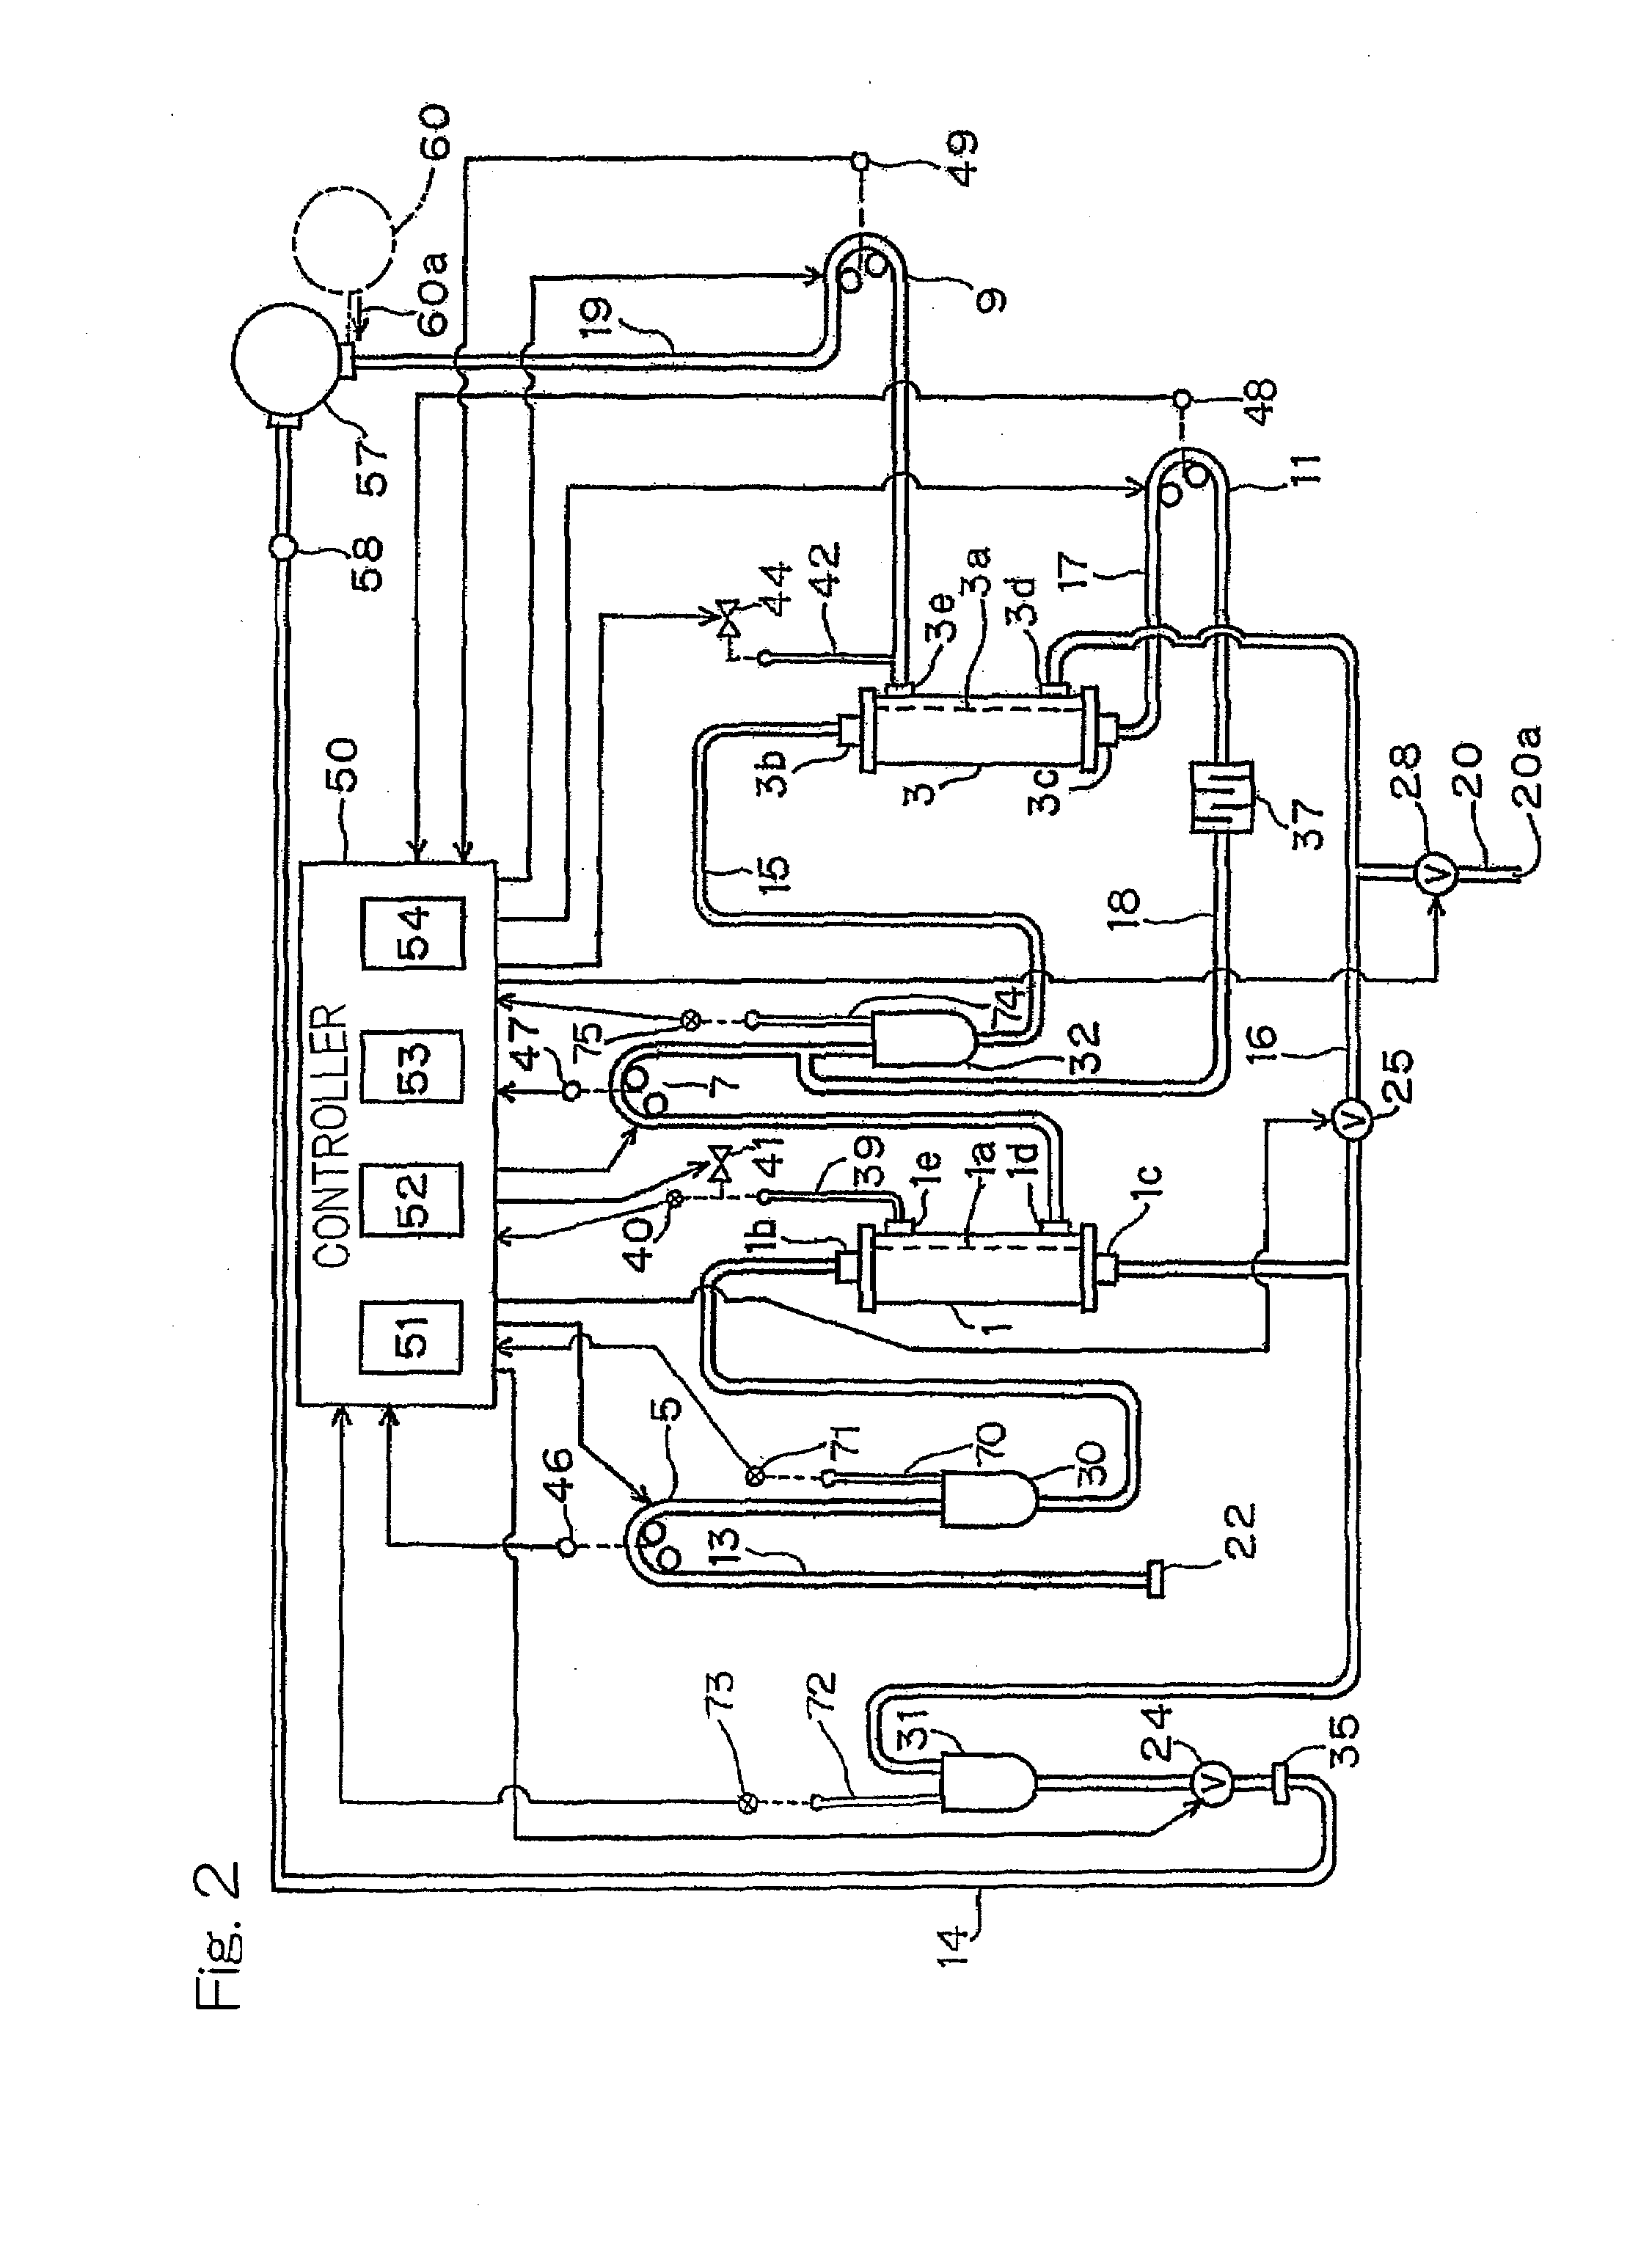 Double filtration blood purification apparatus and method of priming therefor